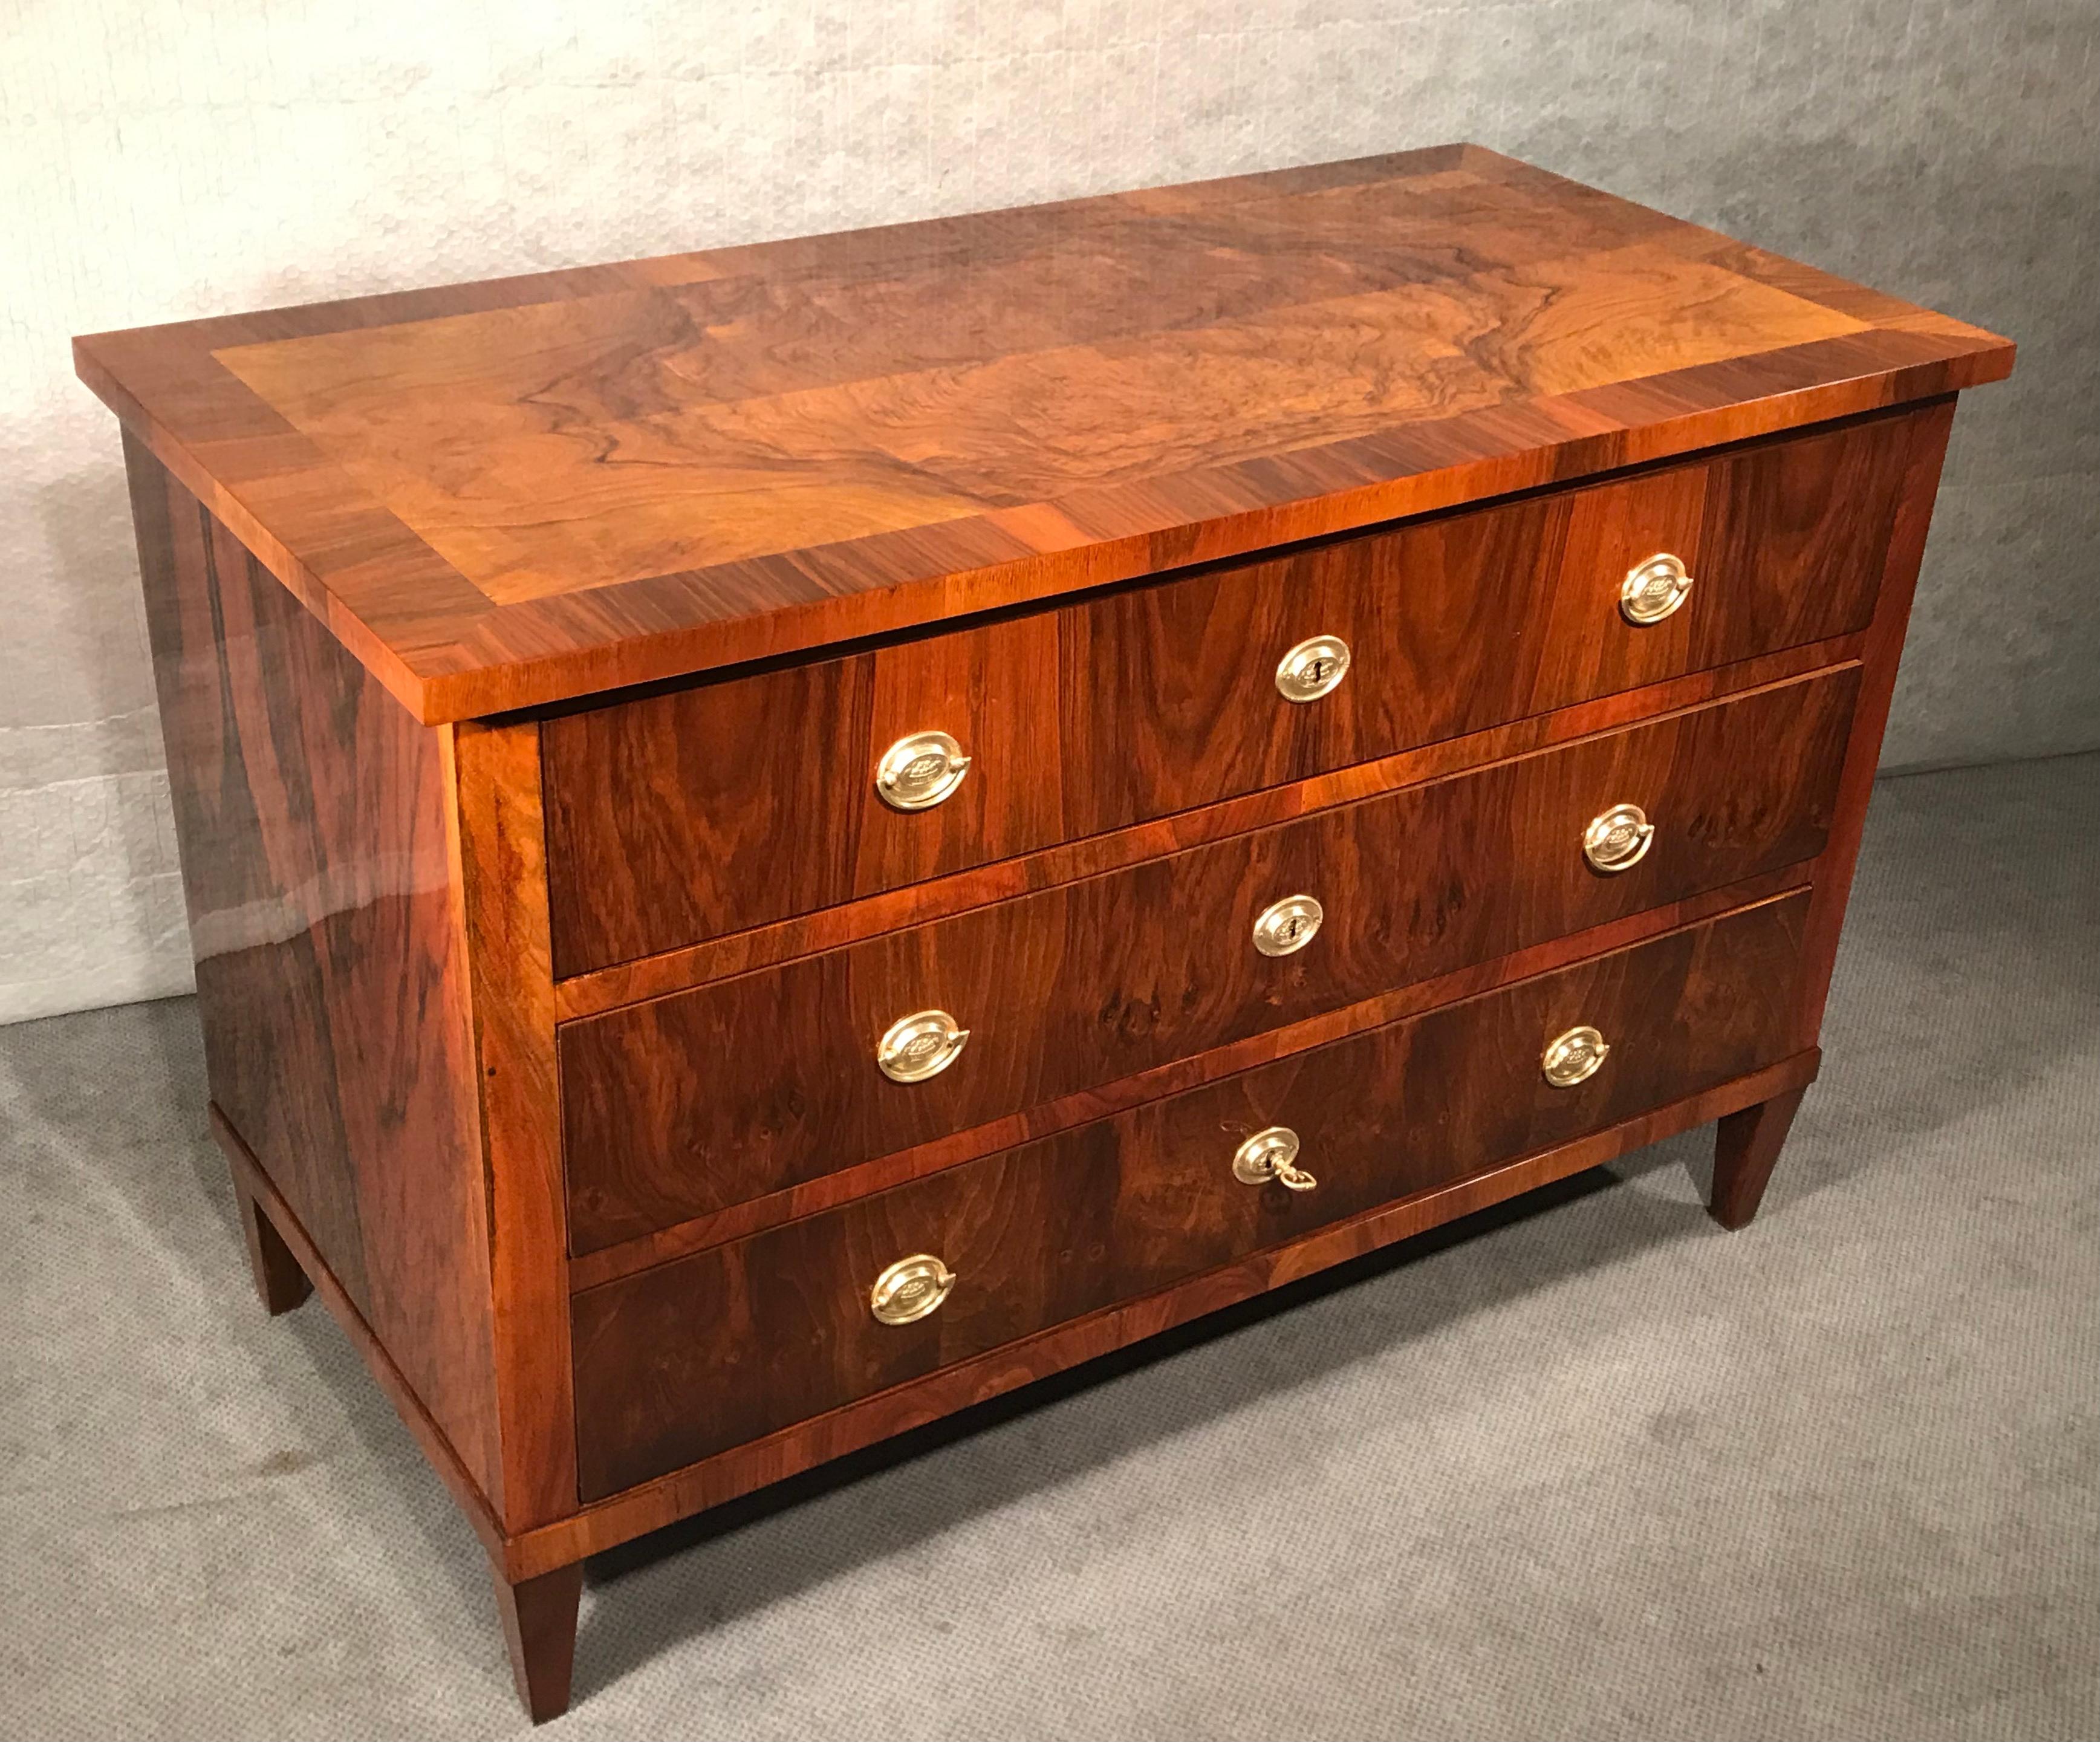 This classic Biedermeier chest of drawers dates back to 1820 and comes from Southern Germany. The three drawer commode features an unpretentious design and stands out for its very pretty walnut veneer. Especially the top has a very unusual veneer